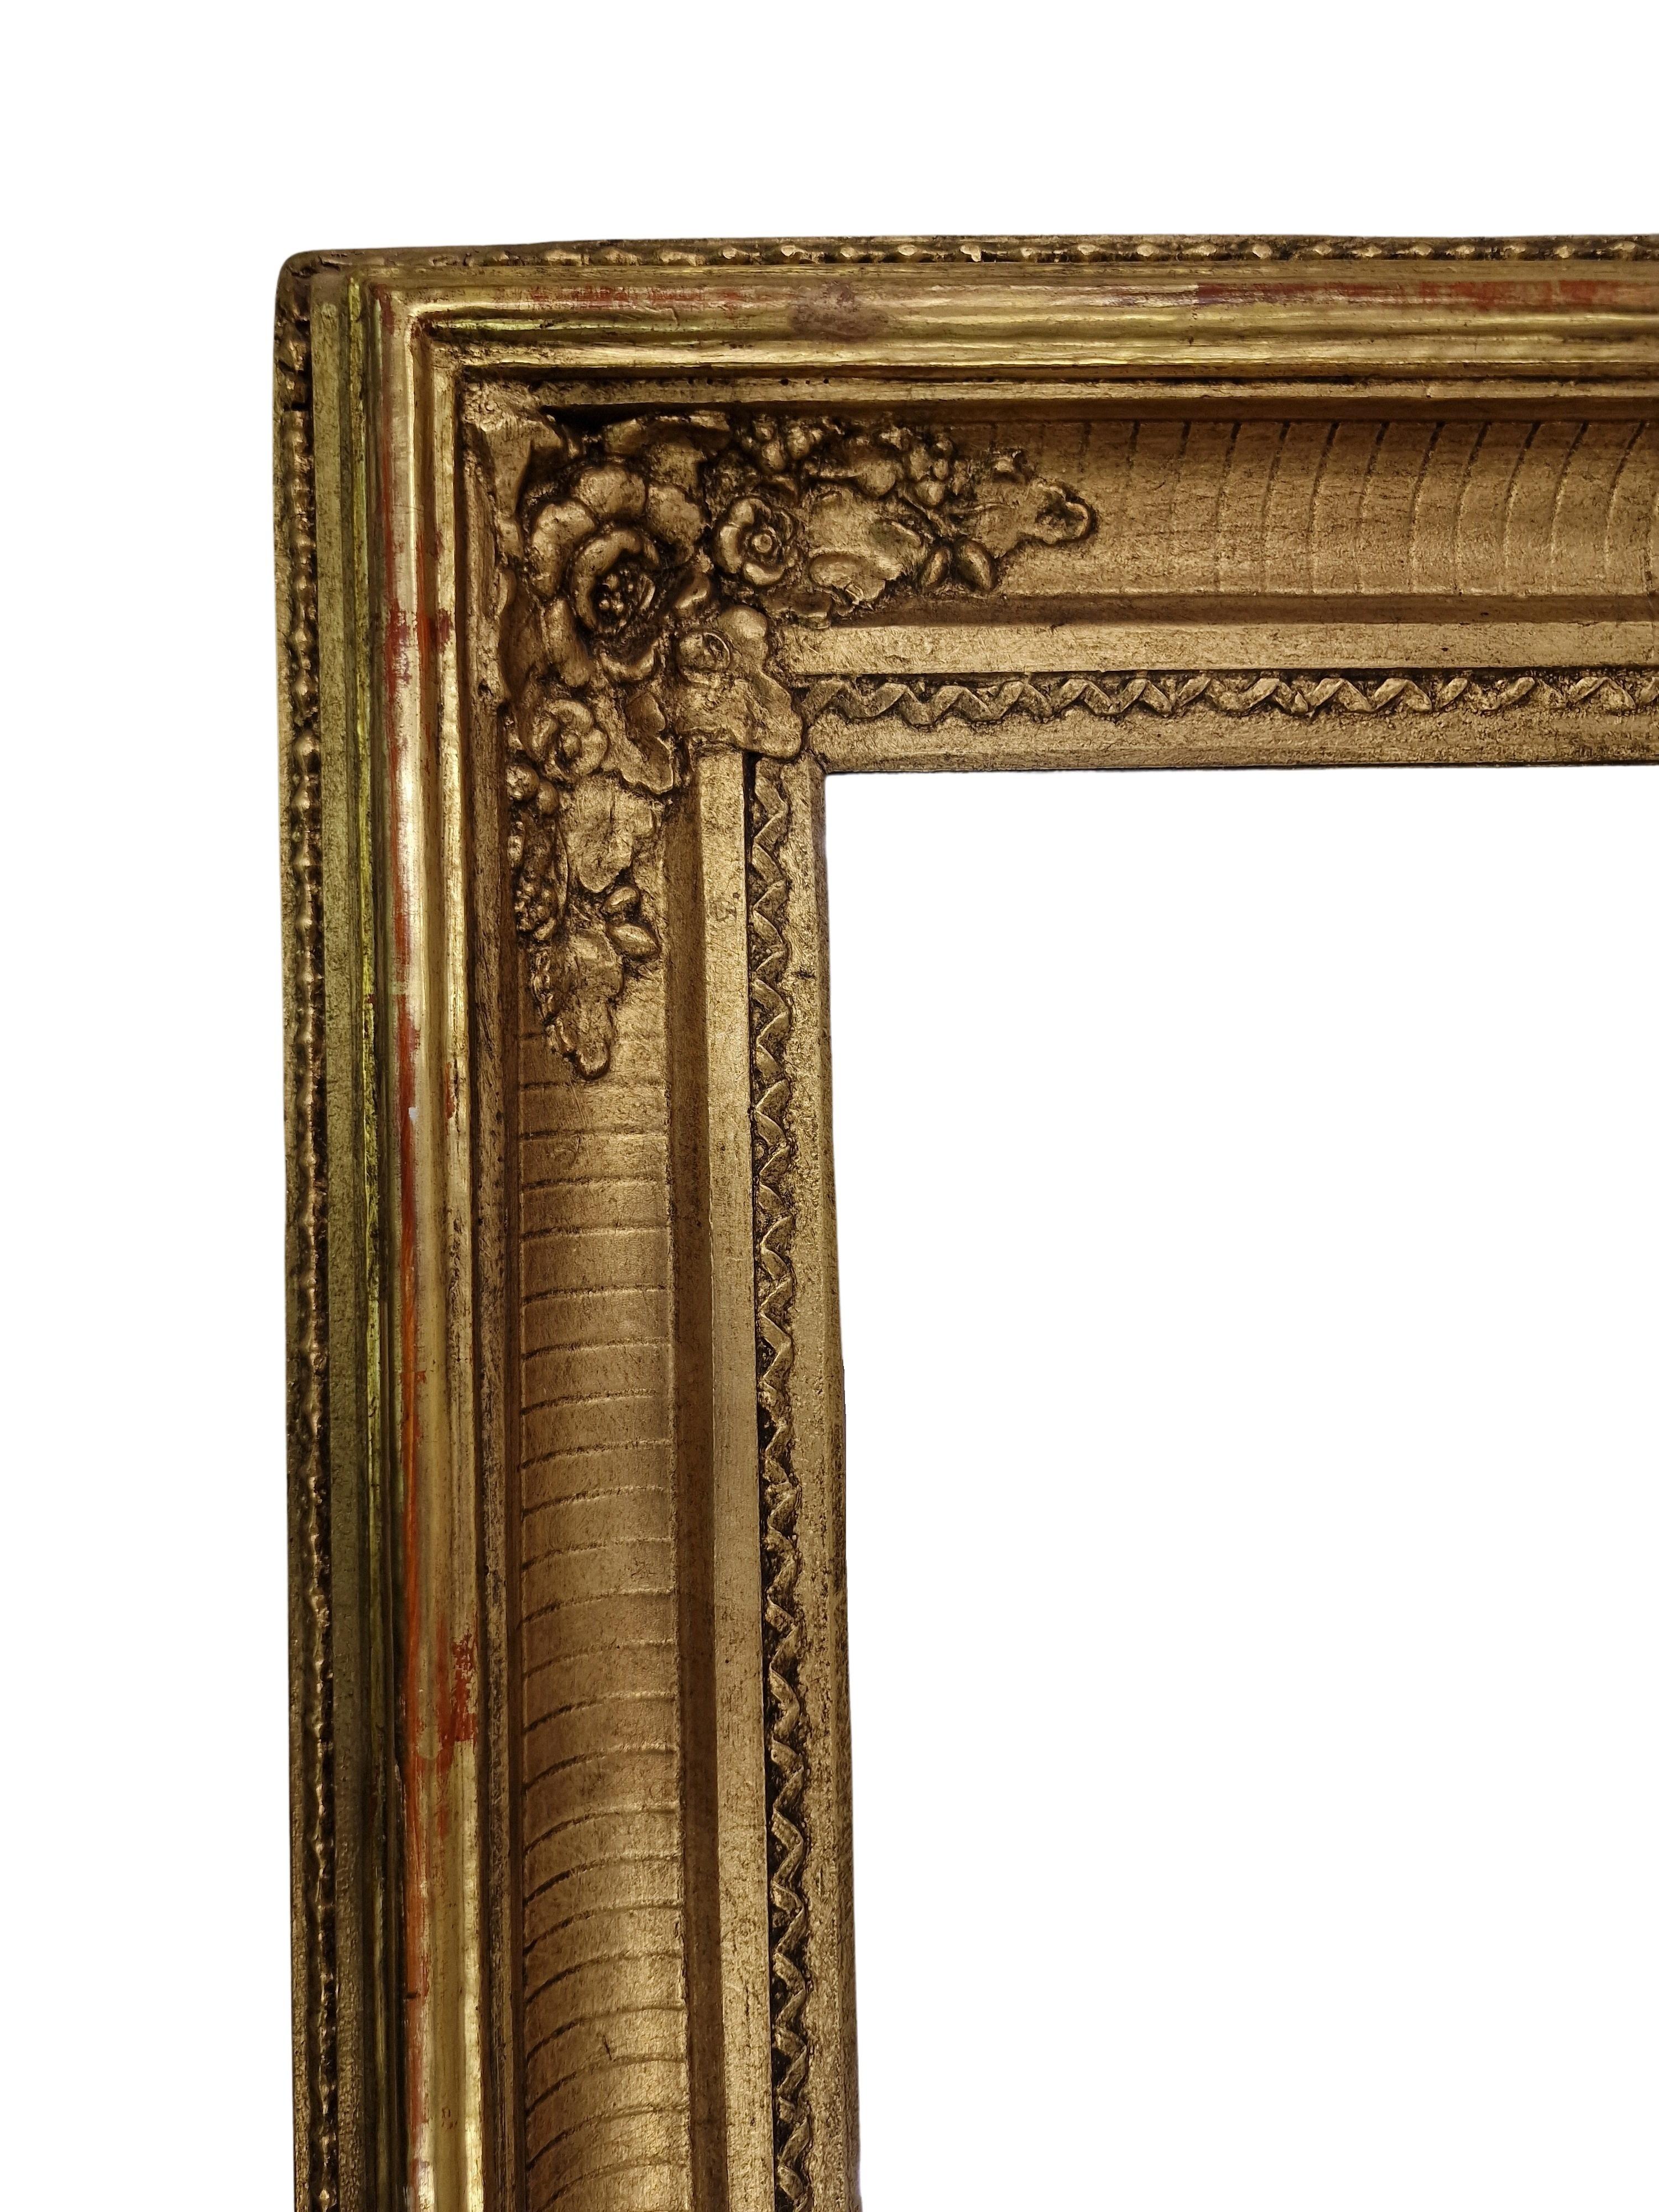 Magnificent wall mirror, frame, an impressive original from the 1880s, made in Austria. 

This impressive hand crafted object is made of wood with a stucco overlay, which is extremely splendidly crafted. There is a real gold surface above a red